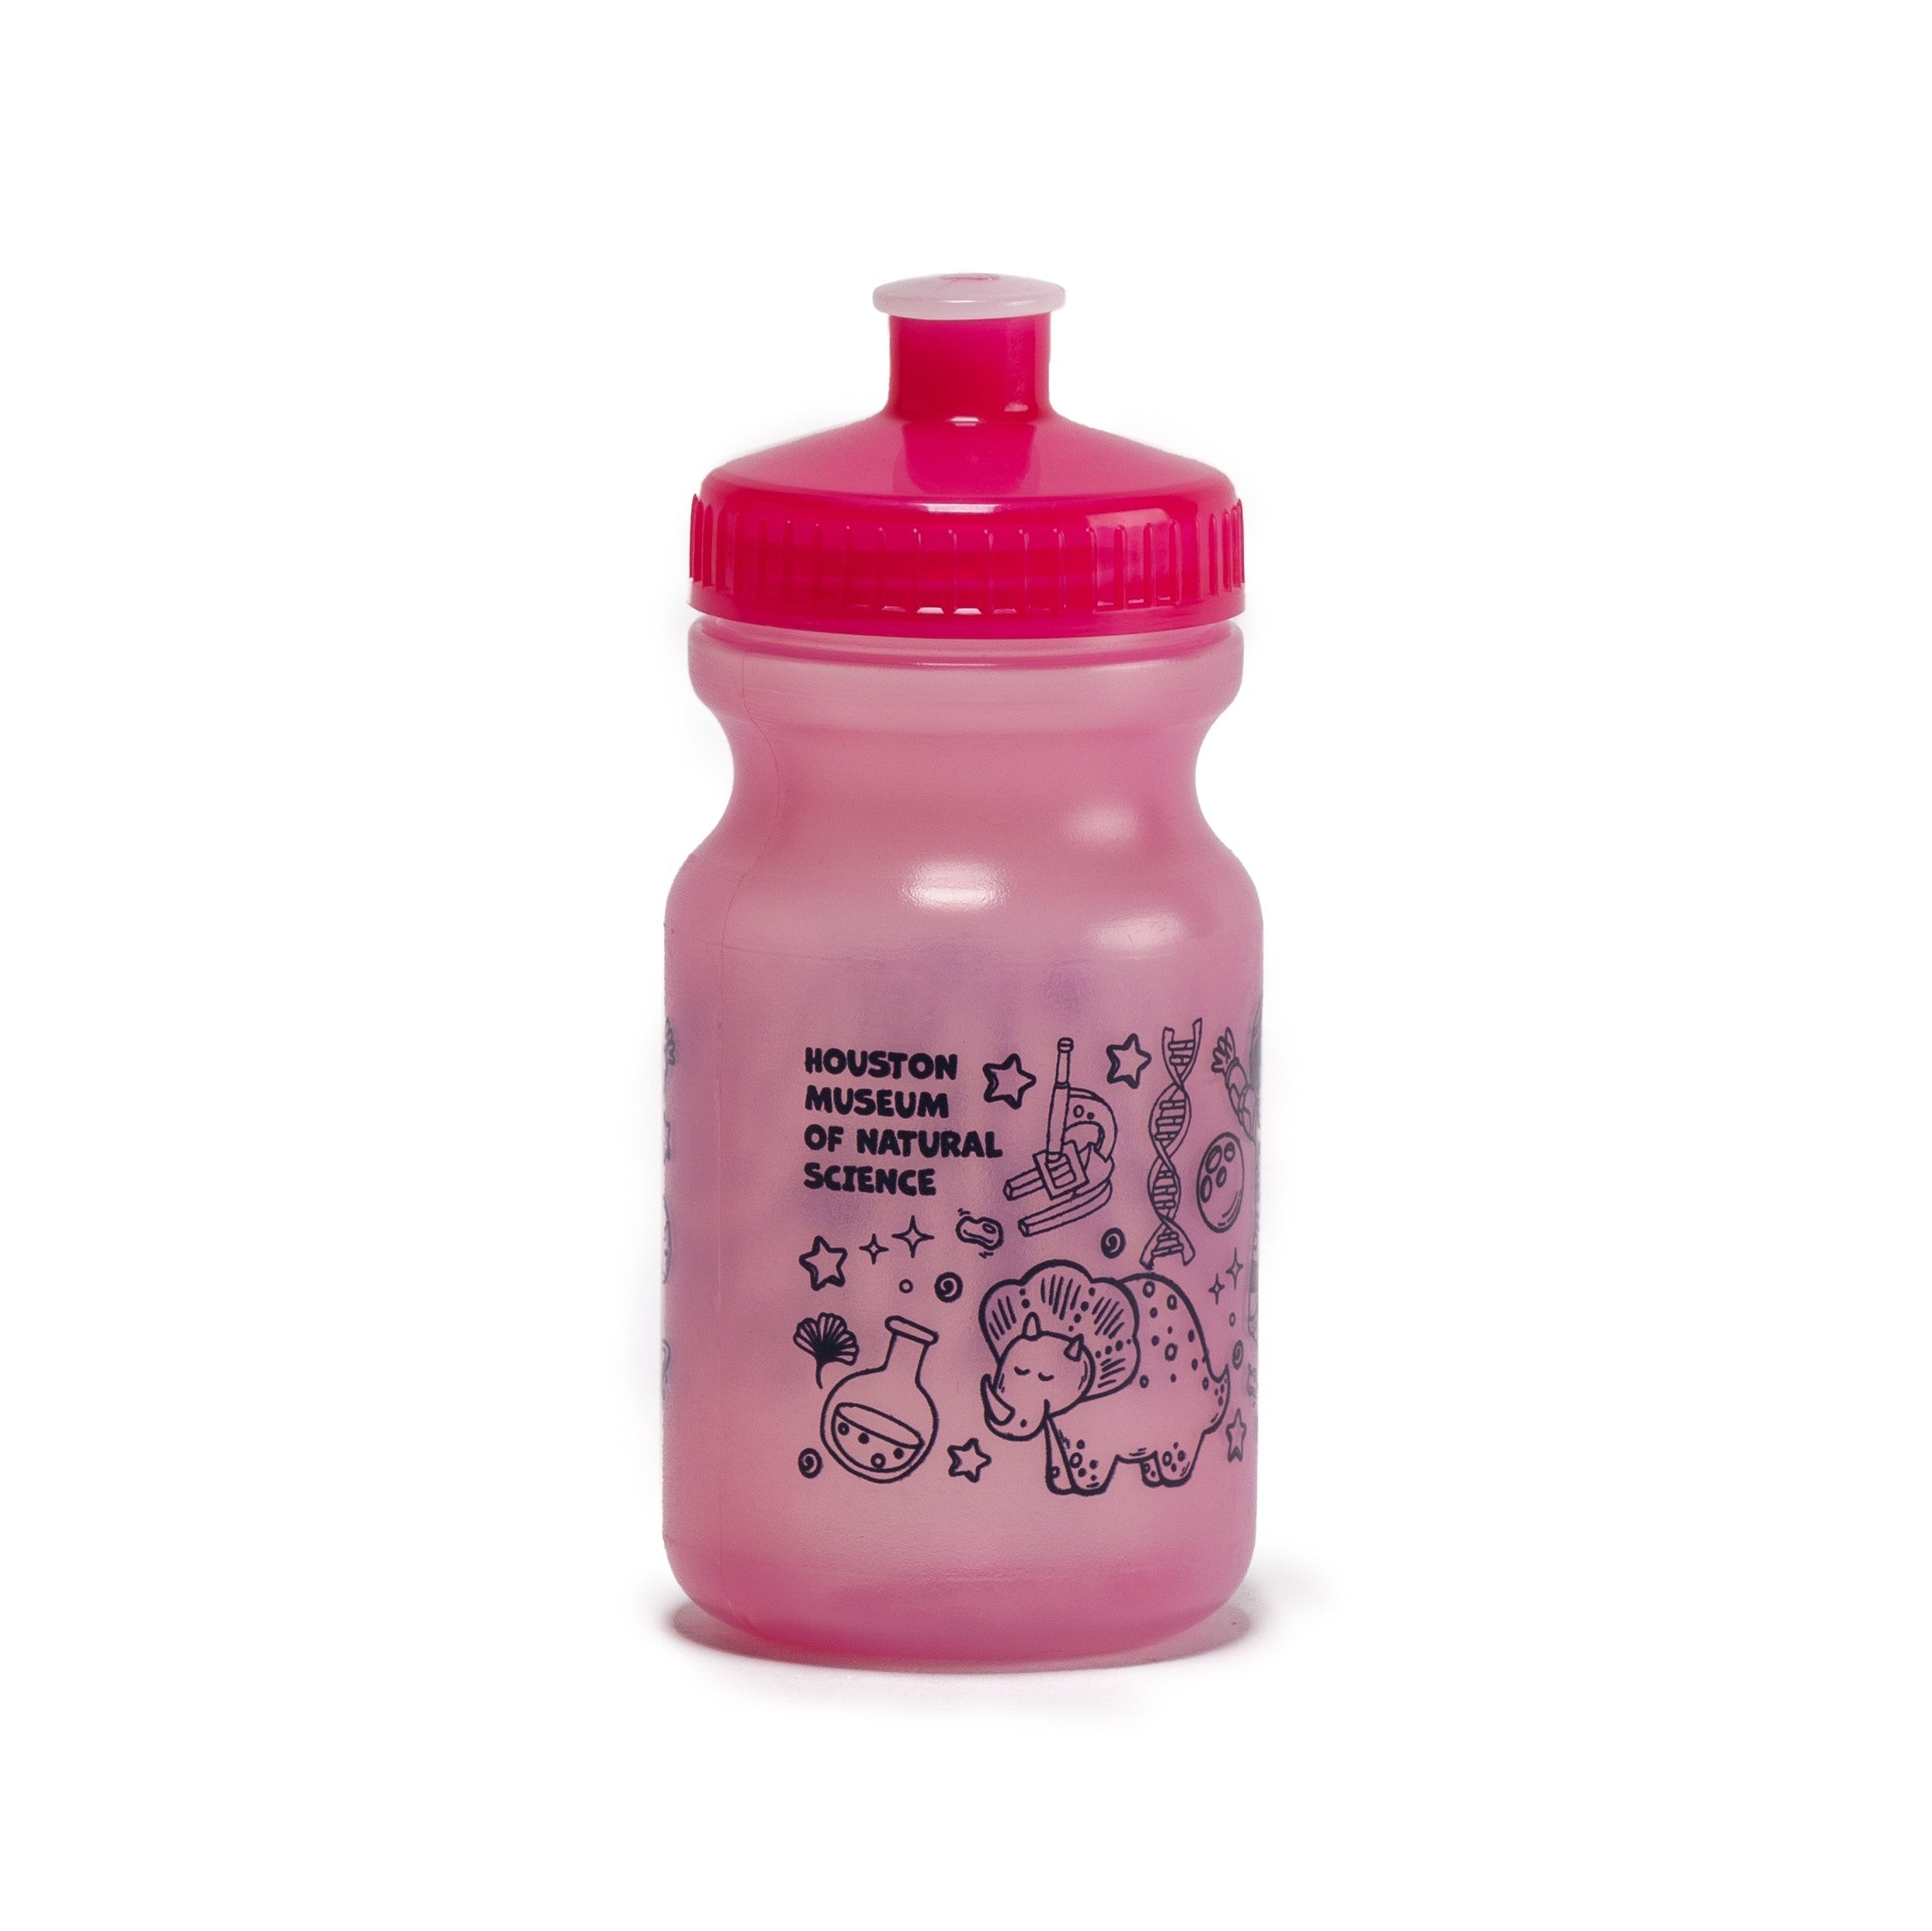 HMNS Lil Squirt Dino & Space Theme Bottle